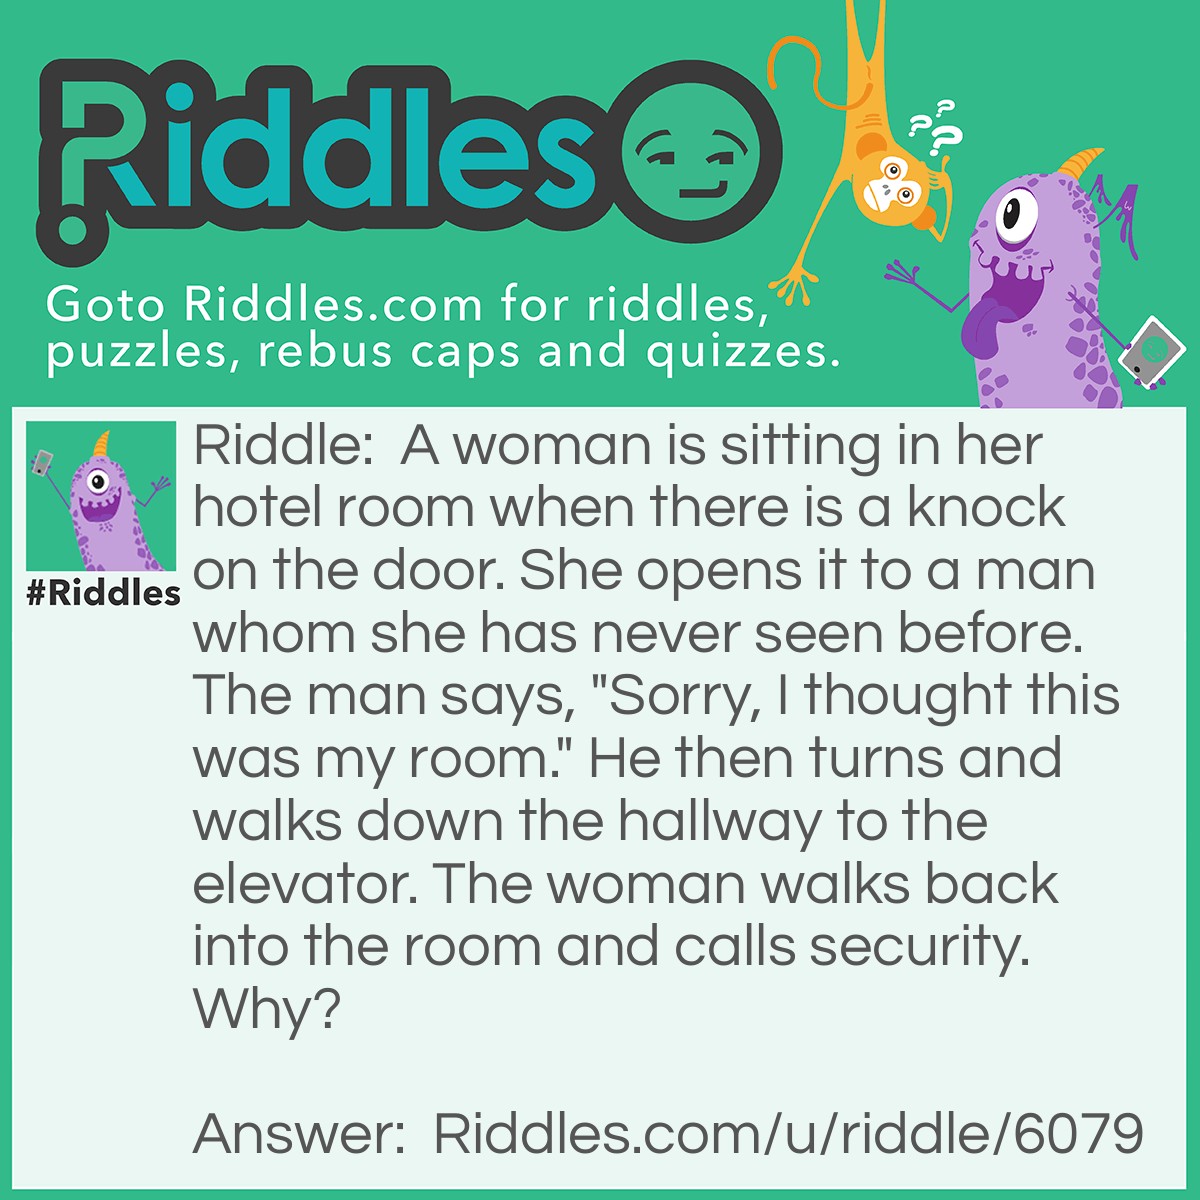 Riddle: A woman is sitting in her hotel room when there is a knock on the door. She opens it to a man whom she has never seen before. The man says, "Sorry, I thought this was my room." He then turns and walks down the hallway to the elevator. The woman walks back into the room and calls security. Why? Answer: Because you don't knock on the door of your own room.